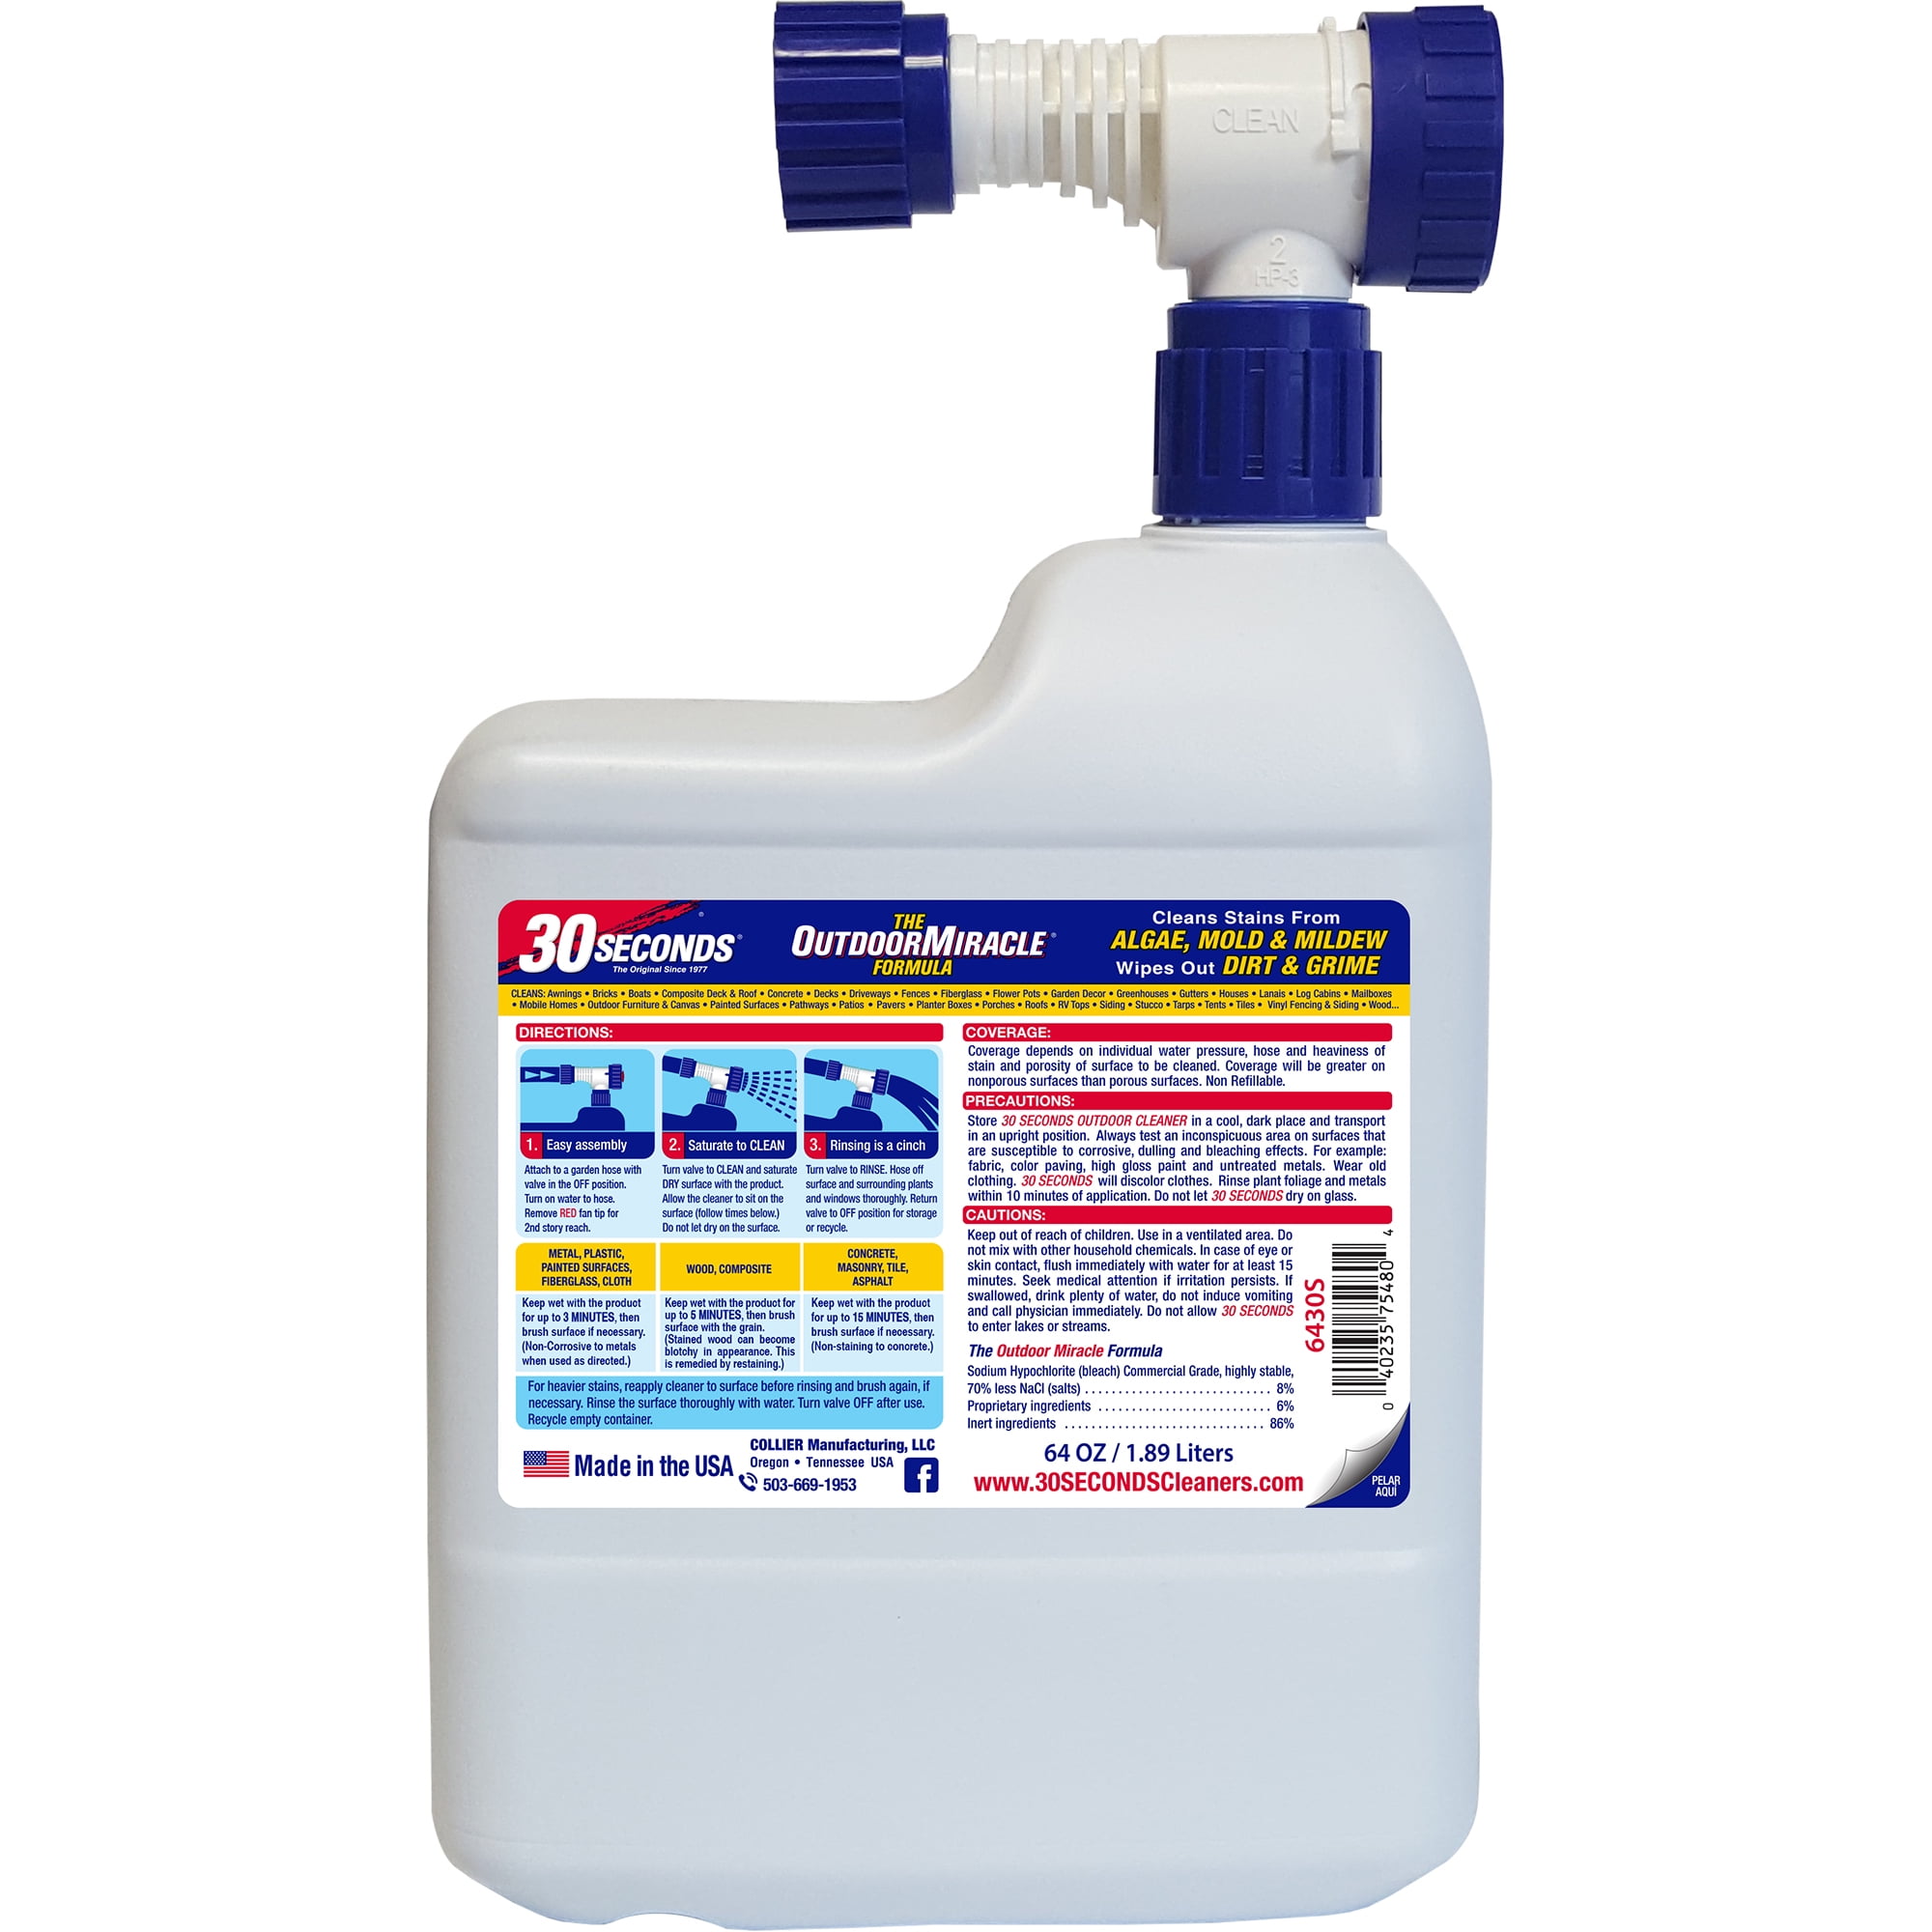 Algae Mold And Mildew 64 Oz, Using 30 Second Outdoor Cleaner